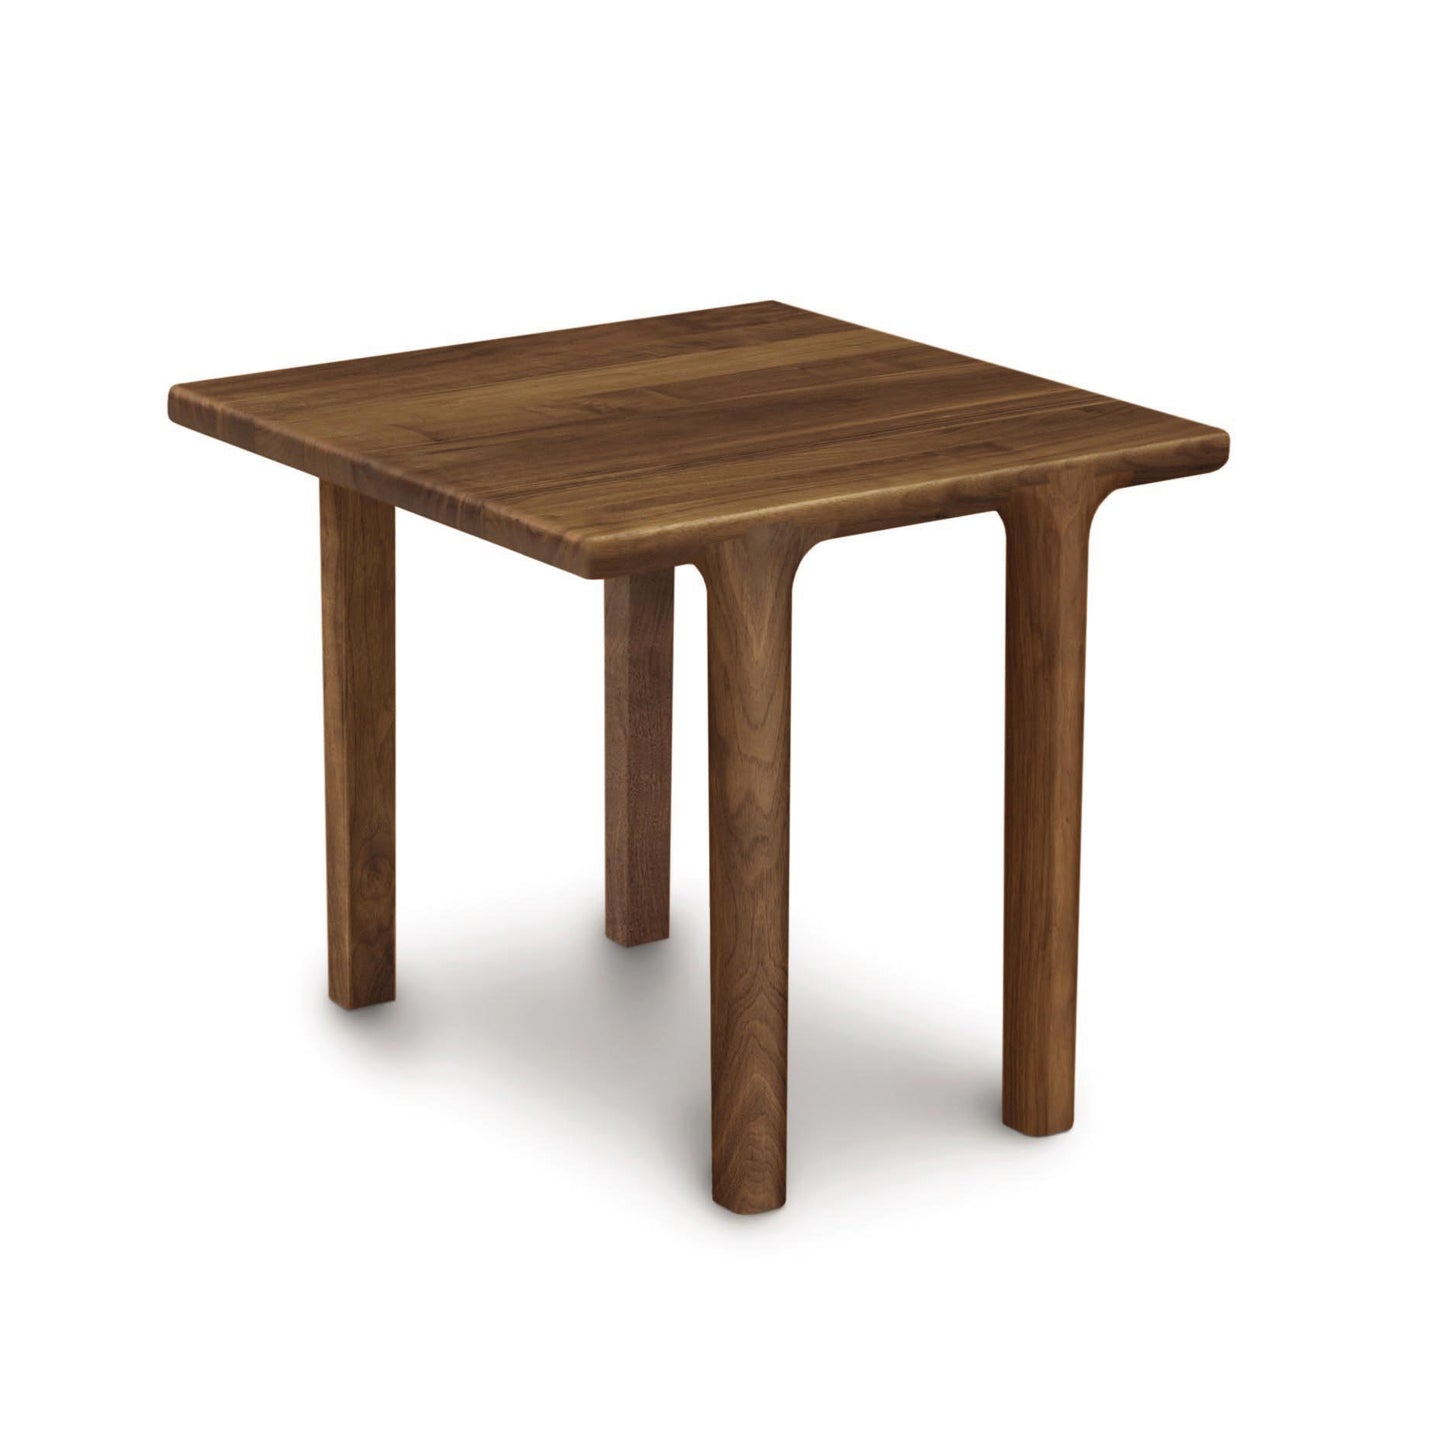 A small Sierra Square End Table with a wooden base by Copeland Furniture.